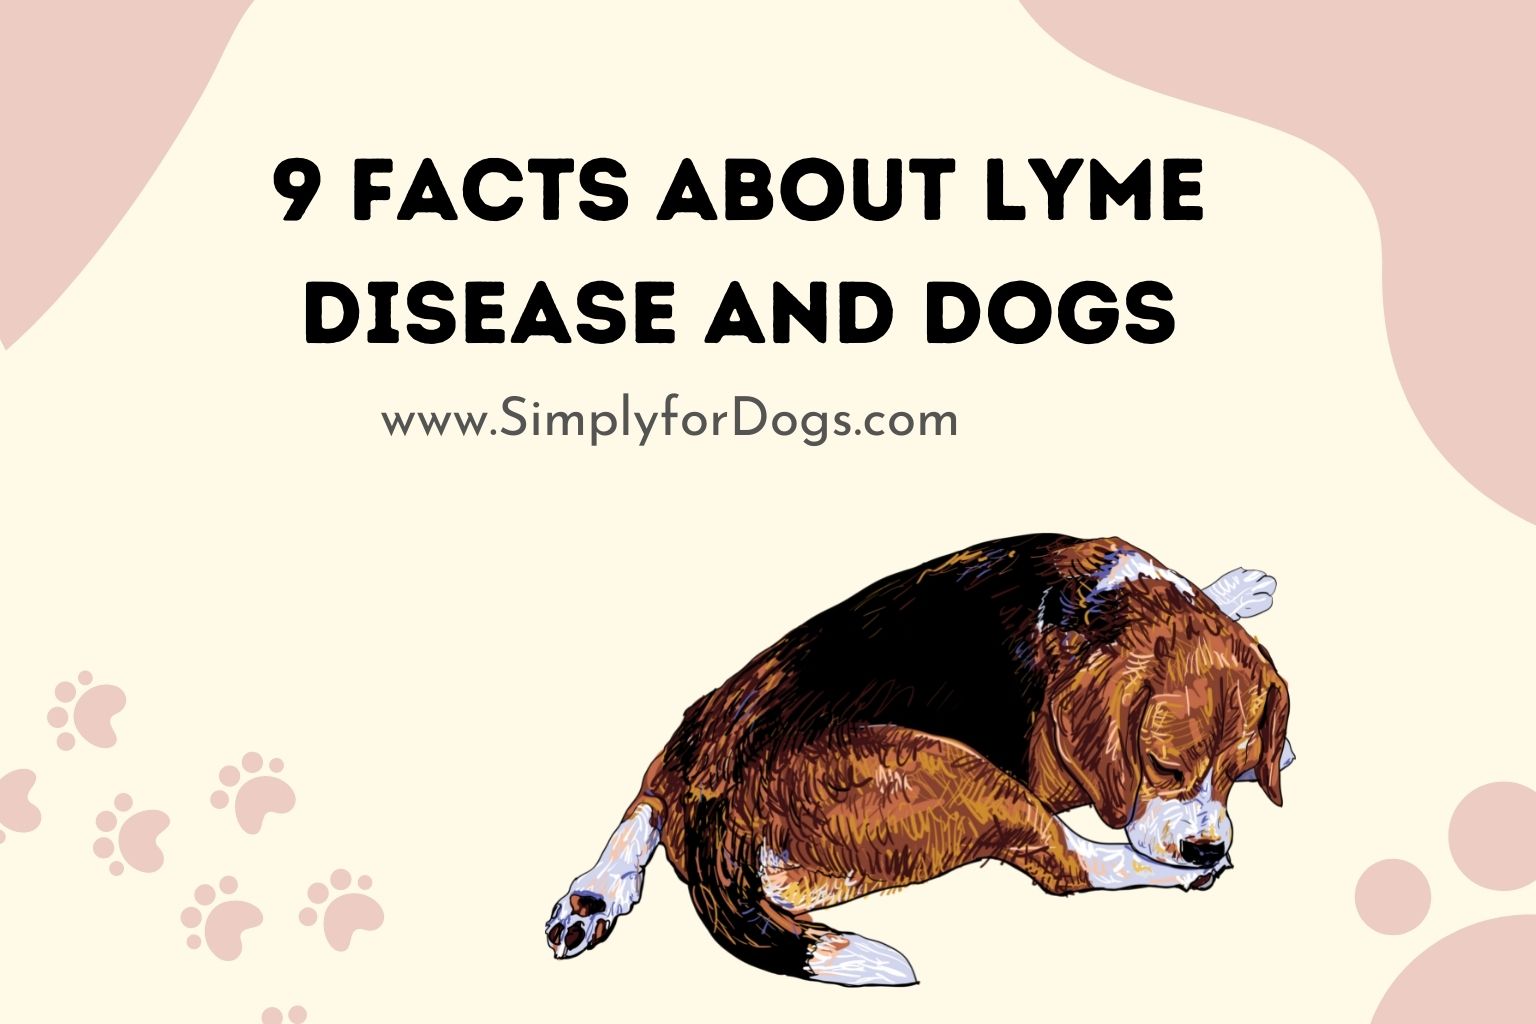 9 Facts About Lyme Disease and Dogs